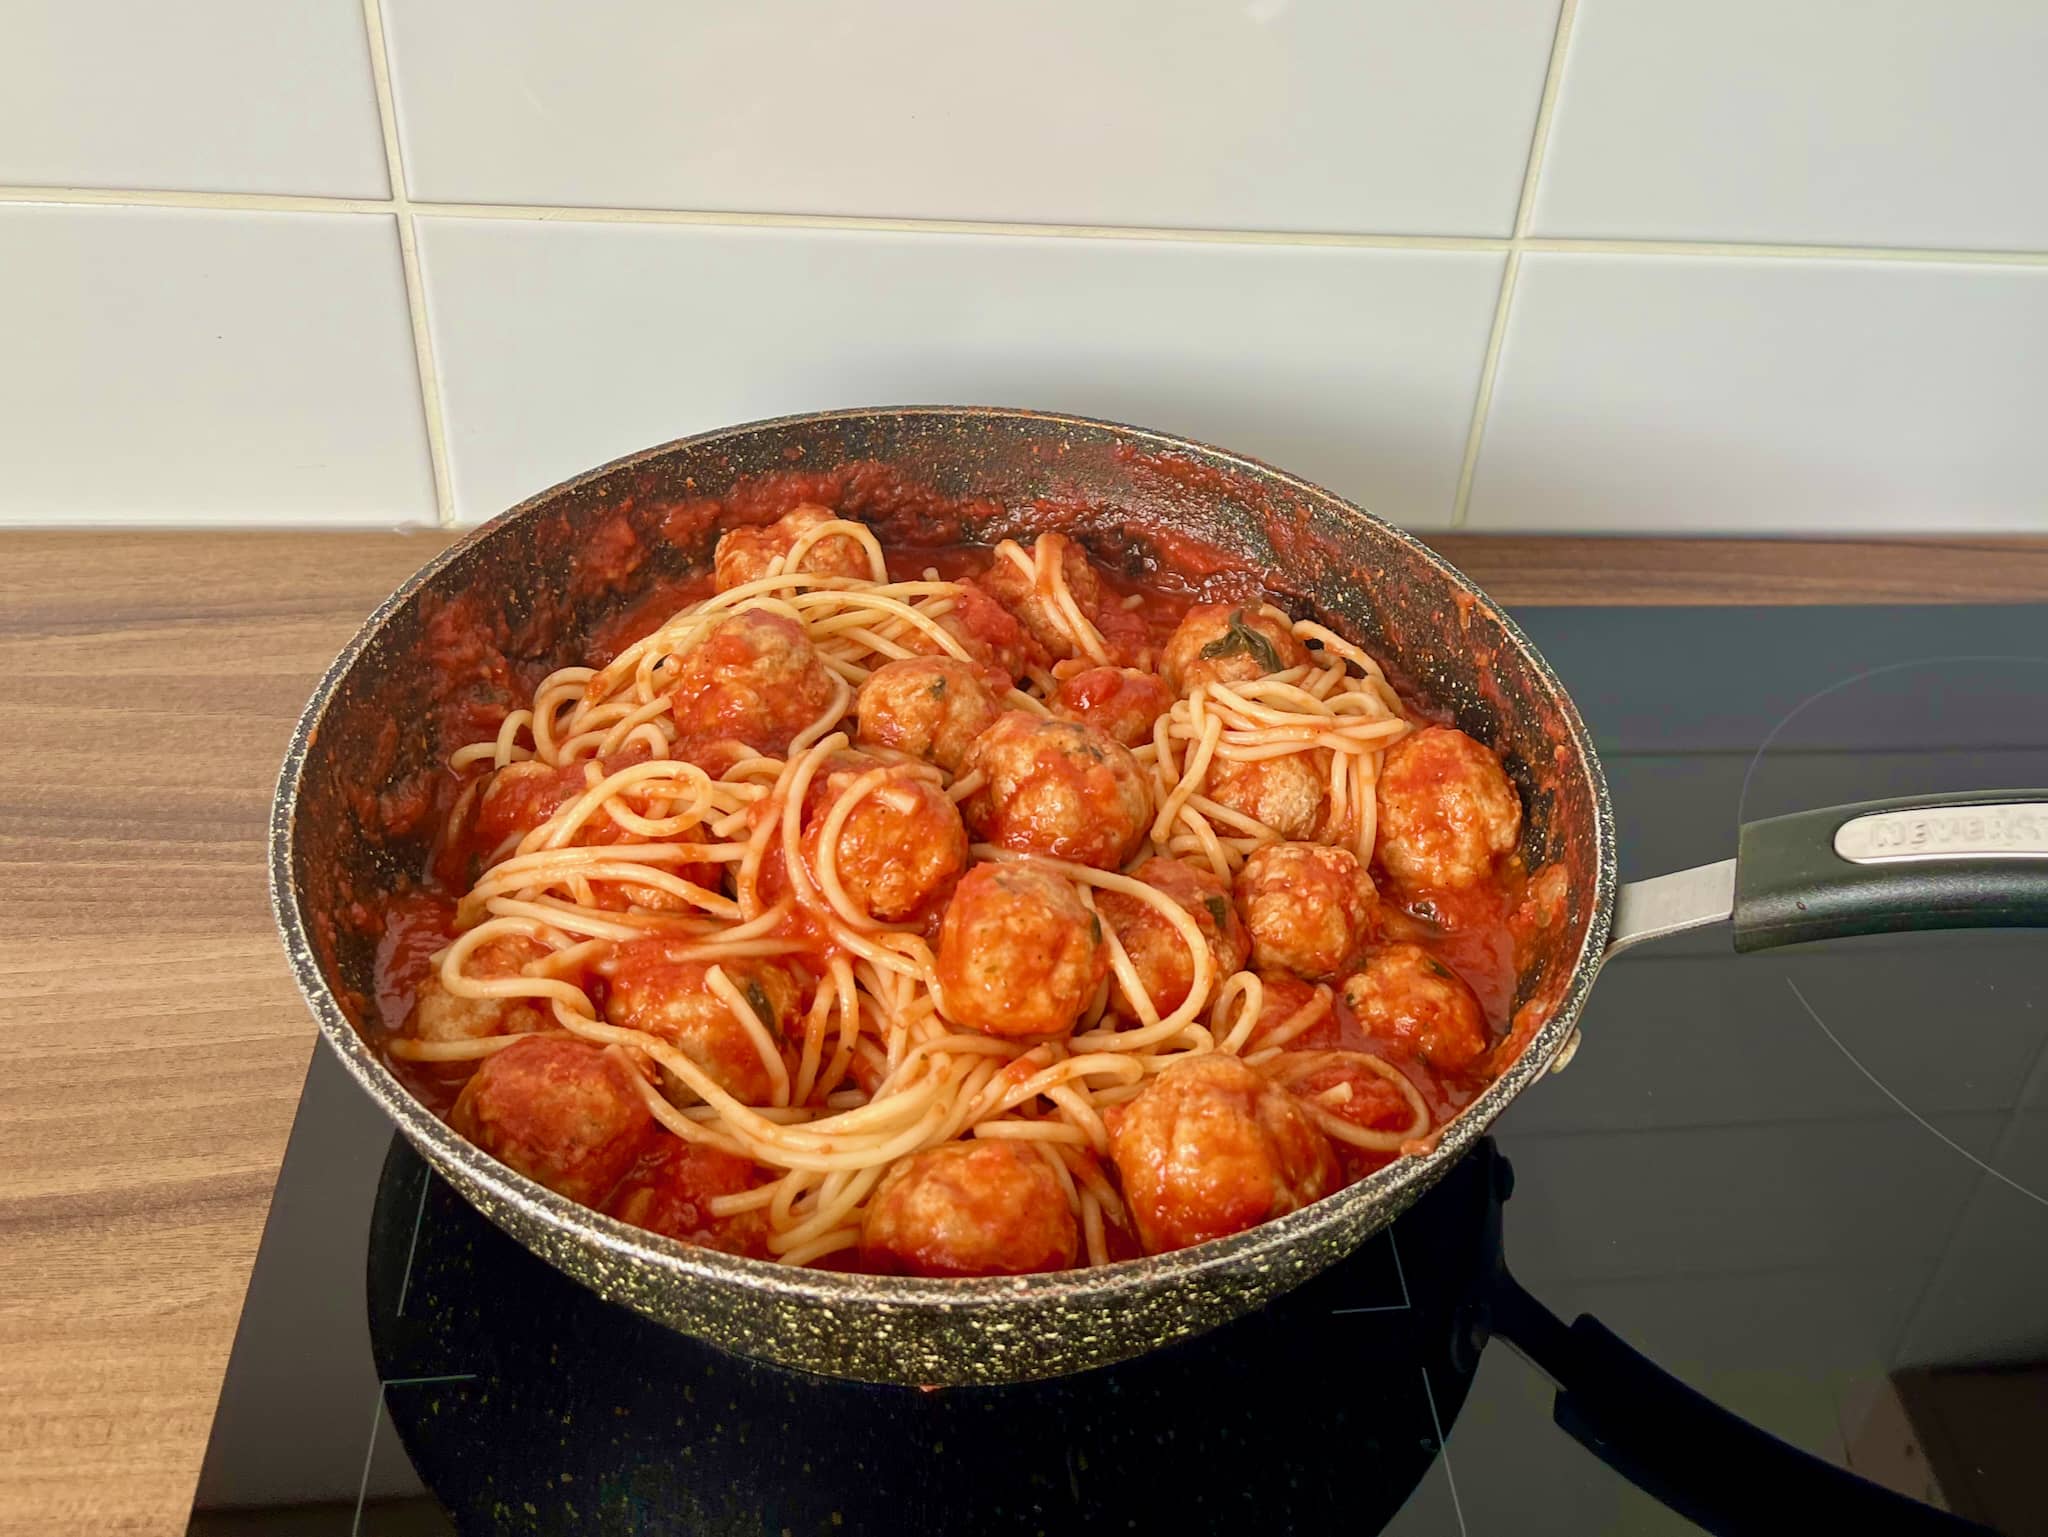 Spaghetti Meatballs - cooked with pasta